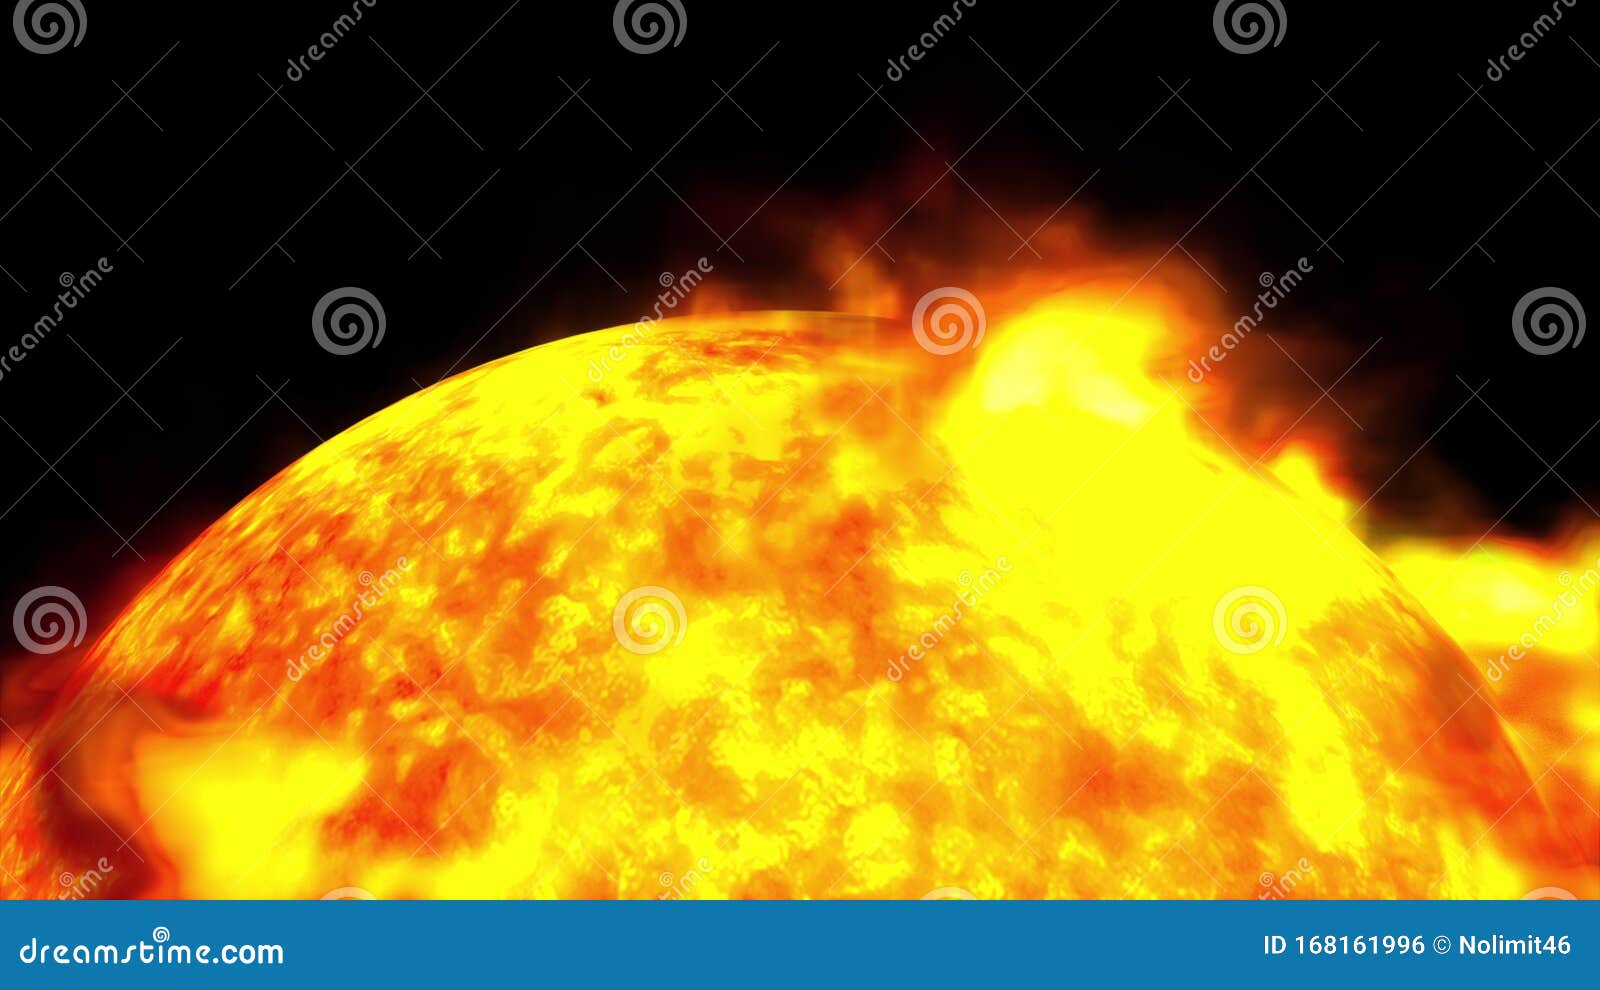 free solar fire 9 download